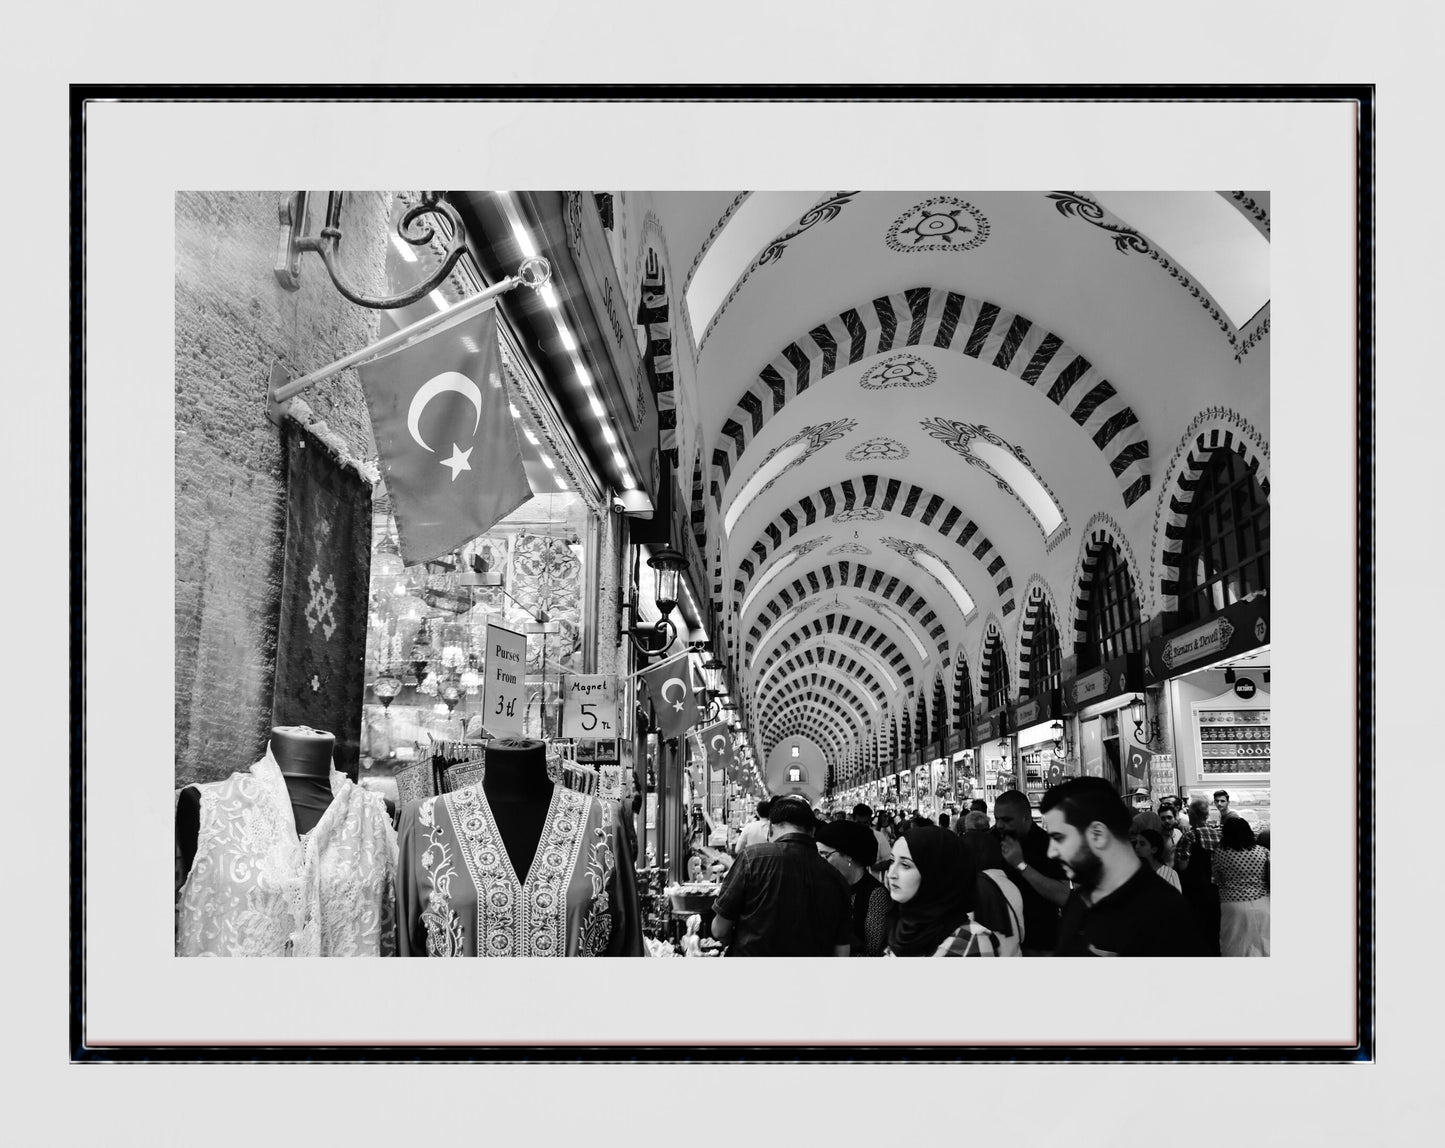 Istanbul Turkey Spice Black And White Bazaar Photography Print Poster